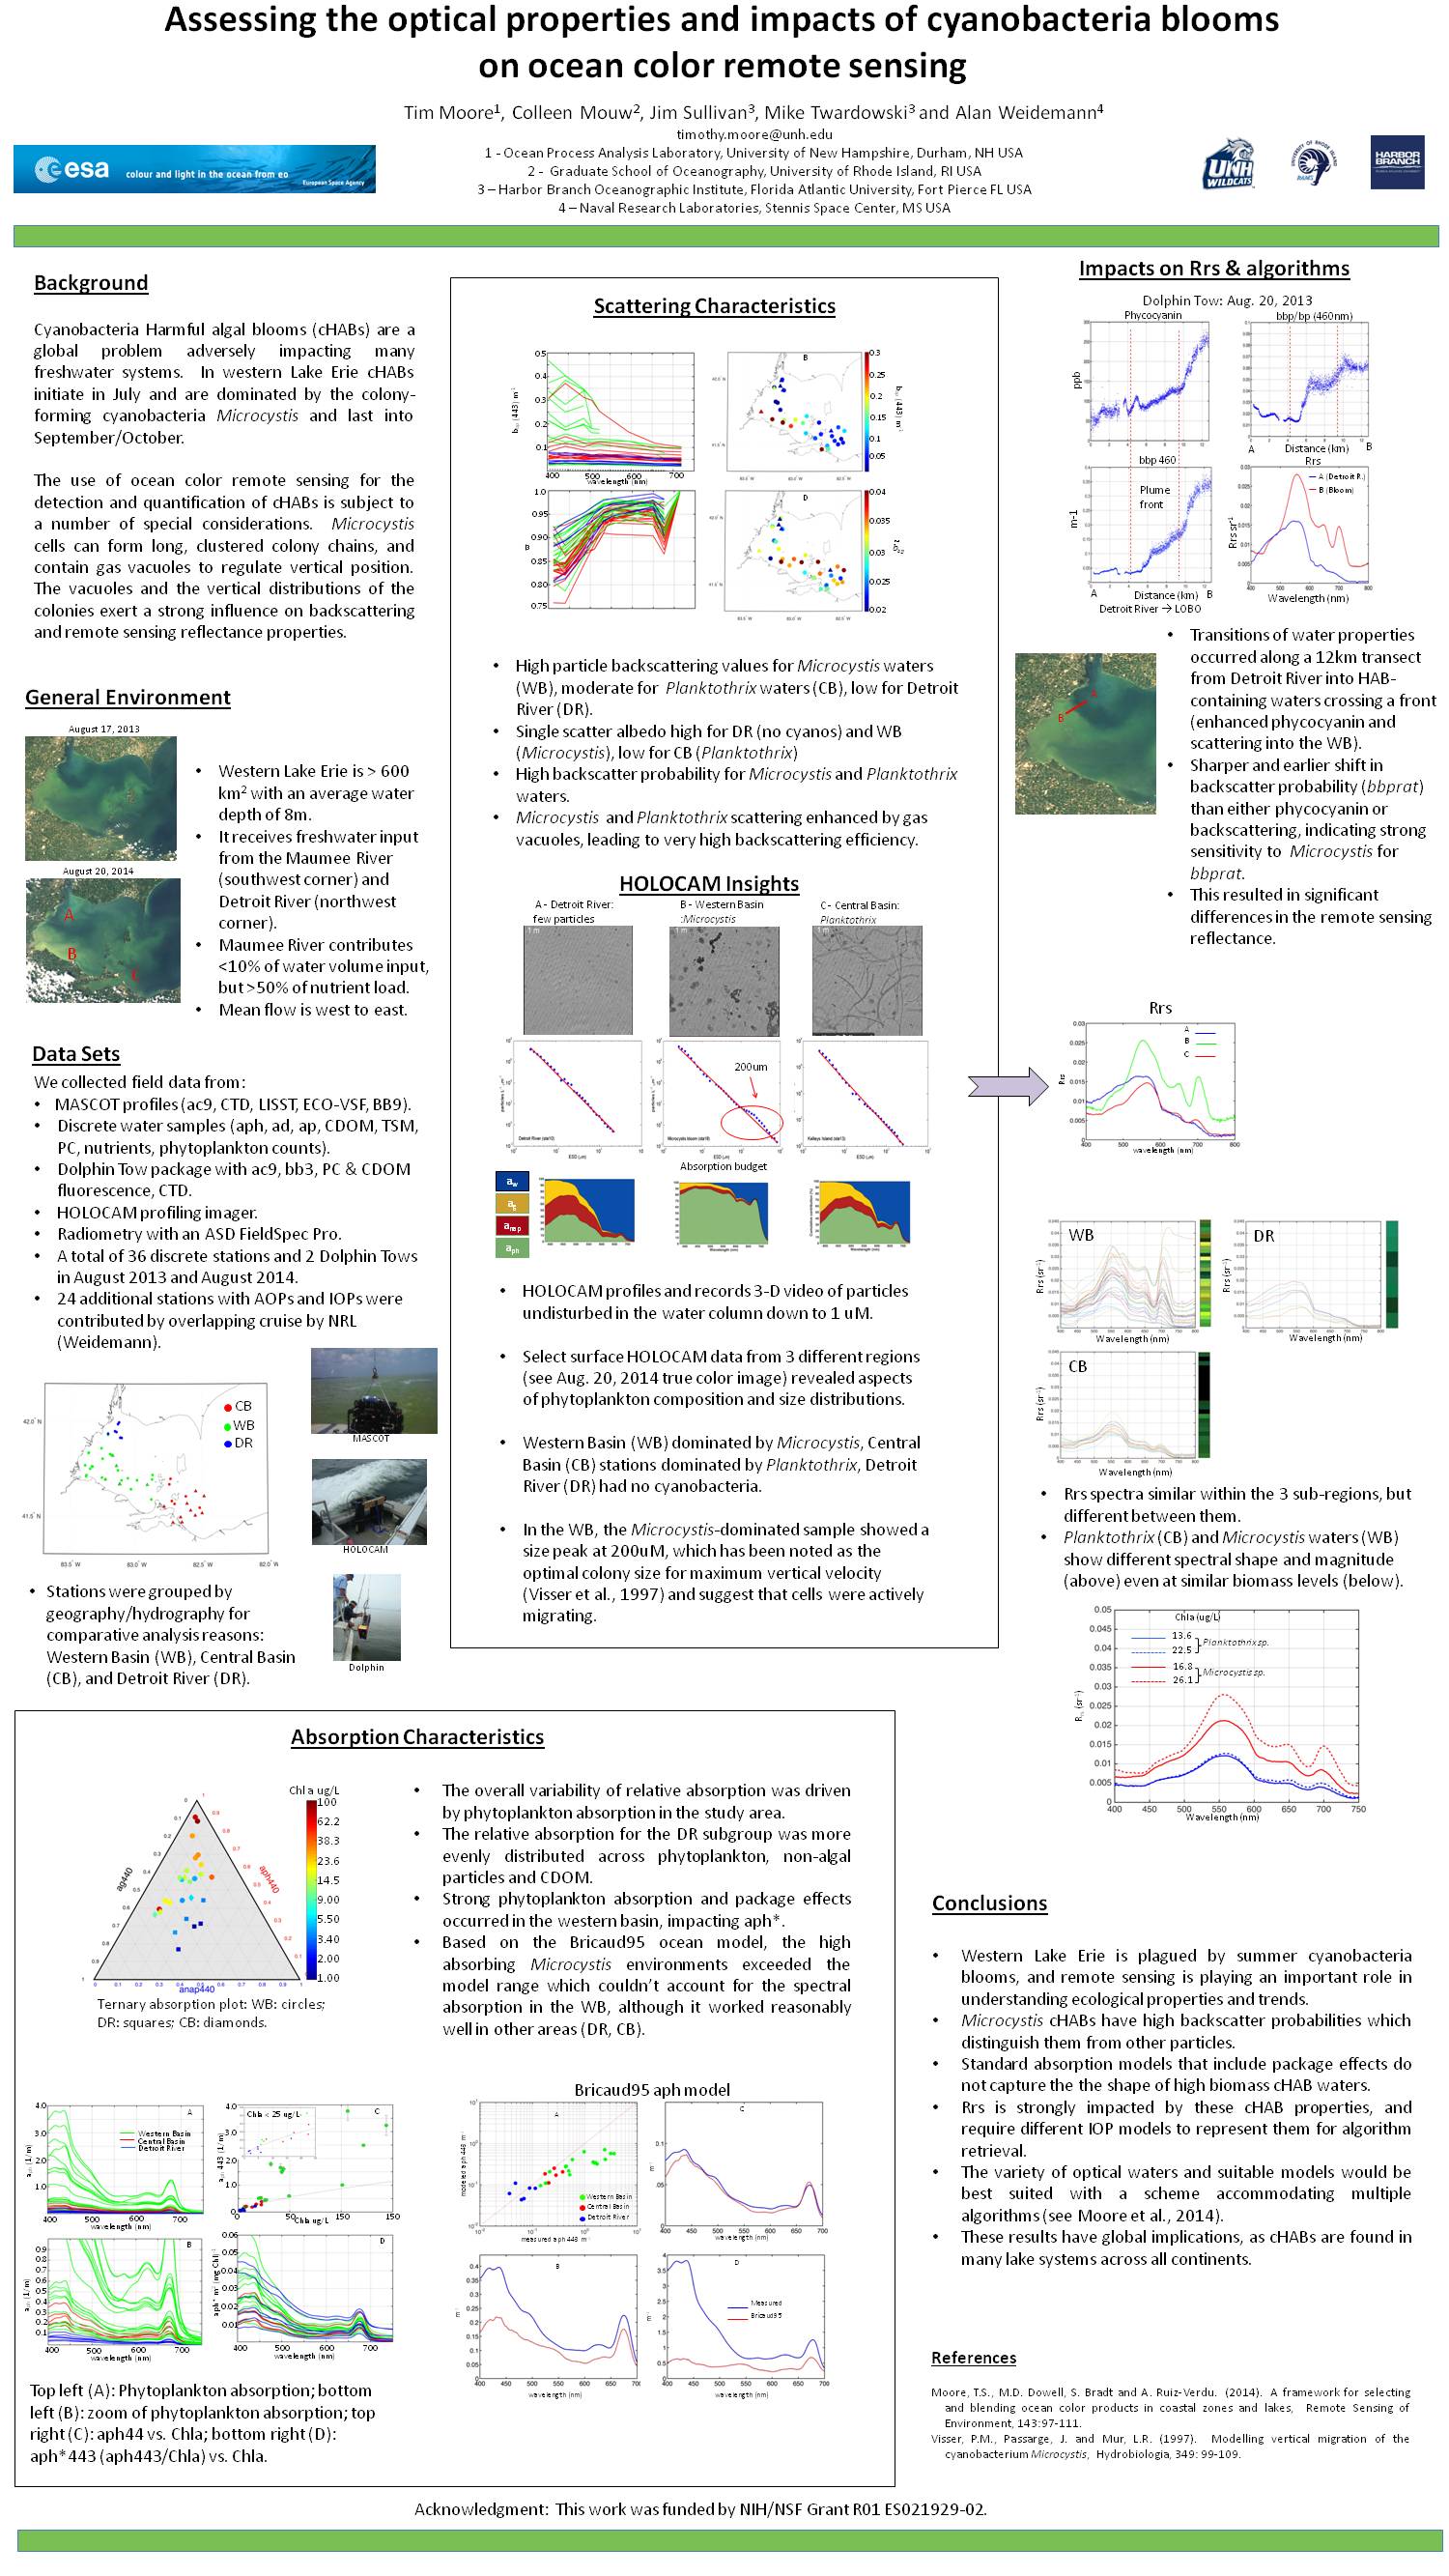 Assessing The Impact Of Optical Properties Of Cyanobacteria Blooms On Bio-Optical Algorithms And Ocean Color Remote Sensing by tsmoore